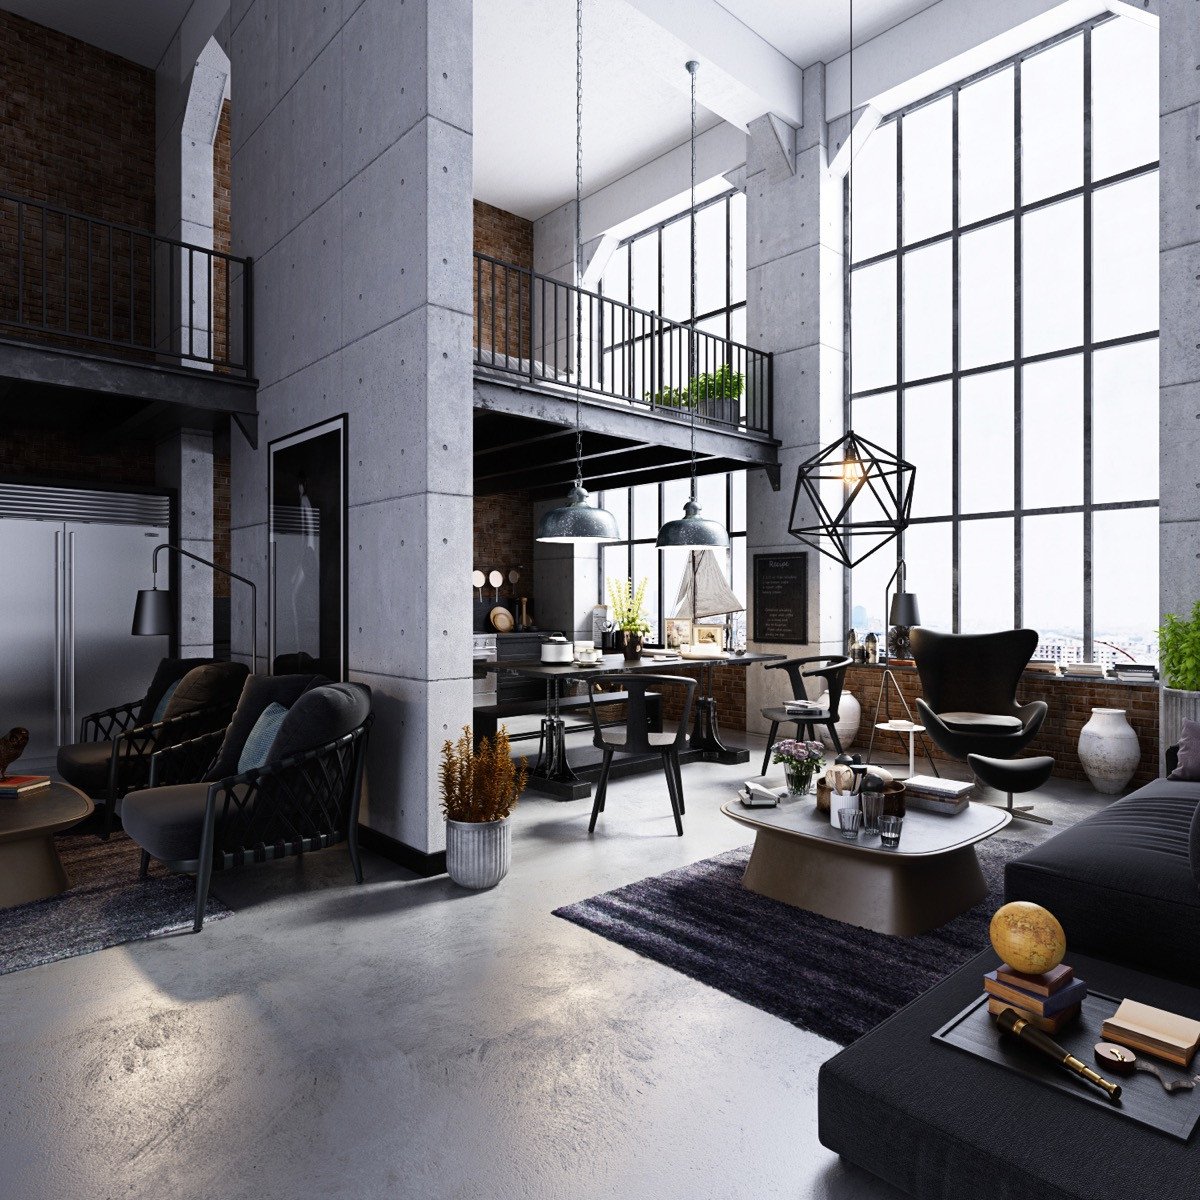 Industrial Modern Living Room Decorating Ideas Industrial Style Living Room Design the Essential Guide